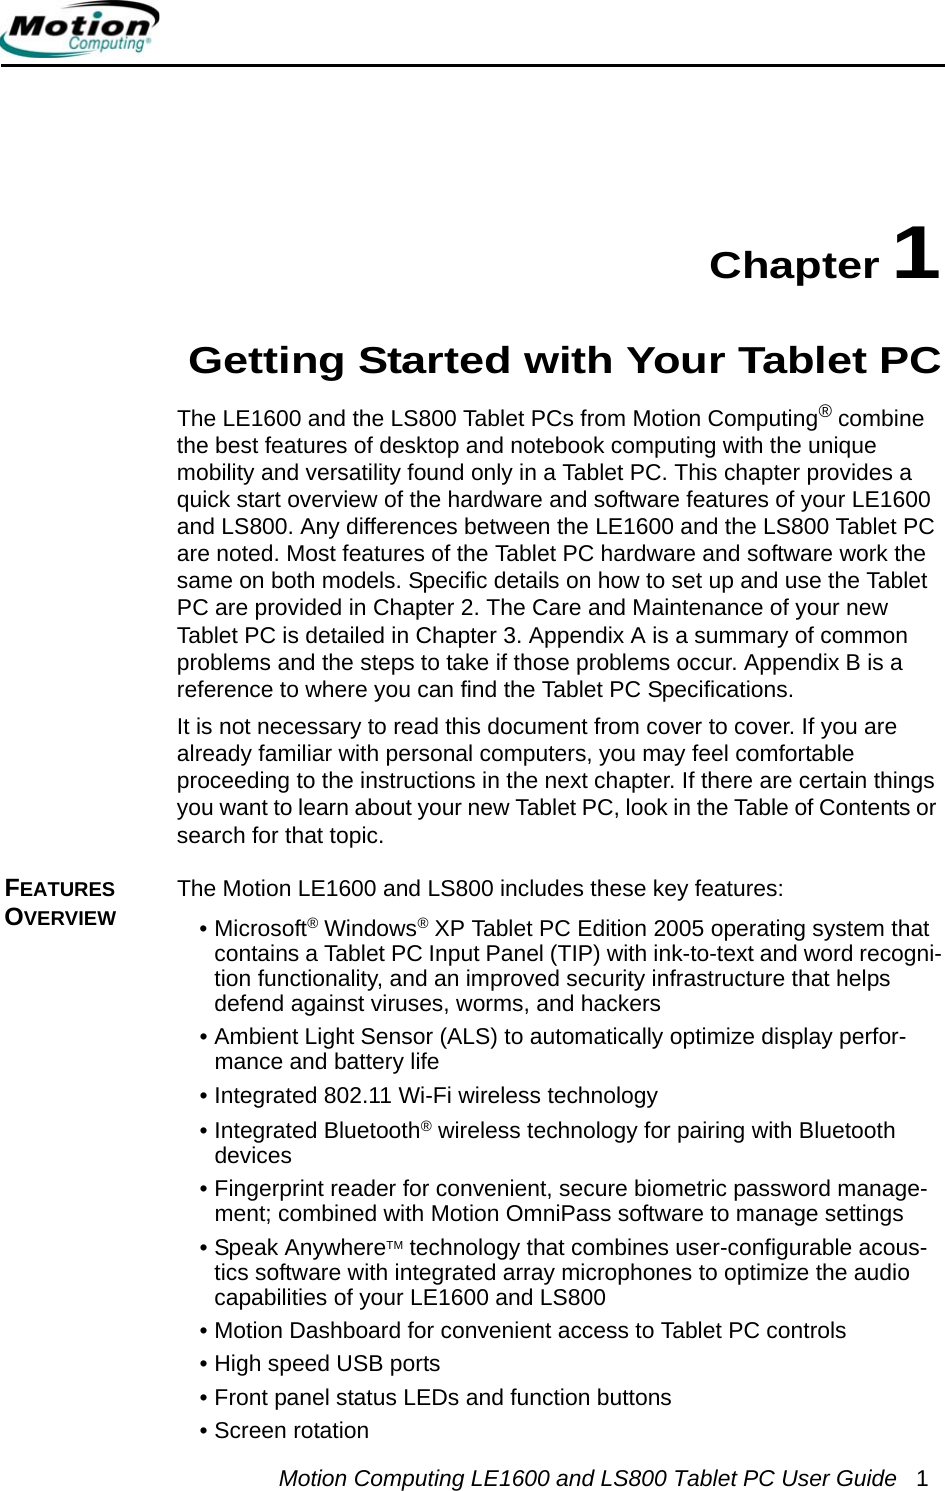 Motion Computing LE1600 and LS800 Tablet PC User Guide 1Chapter 1Getting Started with Your Tablet PCThe LE1600 and the LS800 Tablet PCs from Motion Computing® combine the best features of desktop and notebook computing with the unique mobility and versatility found only in a Tablet PC. This chapter provides a quick start overview of the hardware and software features of your LE1600 and LS800. Any differences between the LE1600 and the LS800 Tablet PC are noted. Most features of the Tablet PC hardware and software work the same on both models. Specific details on how to set up and use the Tablet PC are provided in Chapter 2. The Care and Maintenance of your new Tablet PC is detailed in Chapter 3. Appendix A is a summary of common problems and the steps to take if those problems occur. Appendix B is a reference to where you can find the Tablet PC Specifications.It is not necessary to read this document from cover to cover. If you are already familiar with personal computers, you may feel comfortable proceeding to the instructions in the next chapter. If there are certain things you want to learn about your new Tablet PC, look in the Table of Contents or search for that topic.FEATURES OVERVIEWThe Motion LE1600 and LS800 includes these key features:•Microsoft® Windows® XP Tablet PC Edition 2005 operating system that contains a Tablet PC Input Panel (TIP) with ink-to-text and word recogni-tion functionality, and an improved security infrastructure that helps defend against viruses, worms, and hackers• Ambient Light Sensor (ALS) to automatically optimize display perfor-mance and battery life• Integrated 802.11 Wi-Fi wireless technology• Integrated Bluetooth® wireless technology for pairing with Bluetooth devices• Fingerprint reader for convenient, secure biometric password manage-ment; combined with Motion OmniPass software to manage settings• Speak AnywhereTM technology that combines user-configurable acous-tics software with integrated array microphones to optimize the audio capabilities of your LE1600 and LS800• Motion Dashboard for convenient access to Tablet PC controls• High speed USB ports • Front panel status LEDs and function buttons • Screen rotation